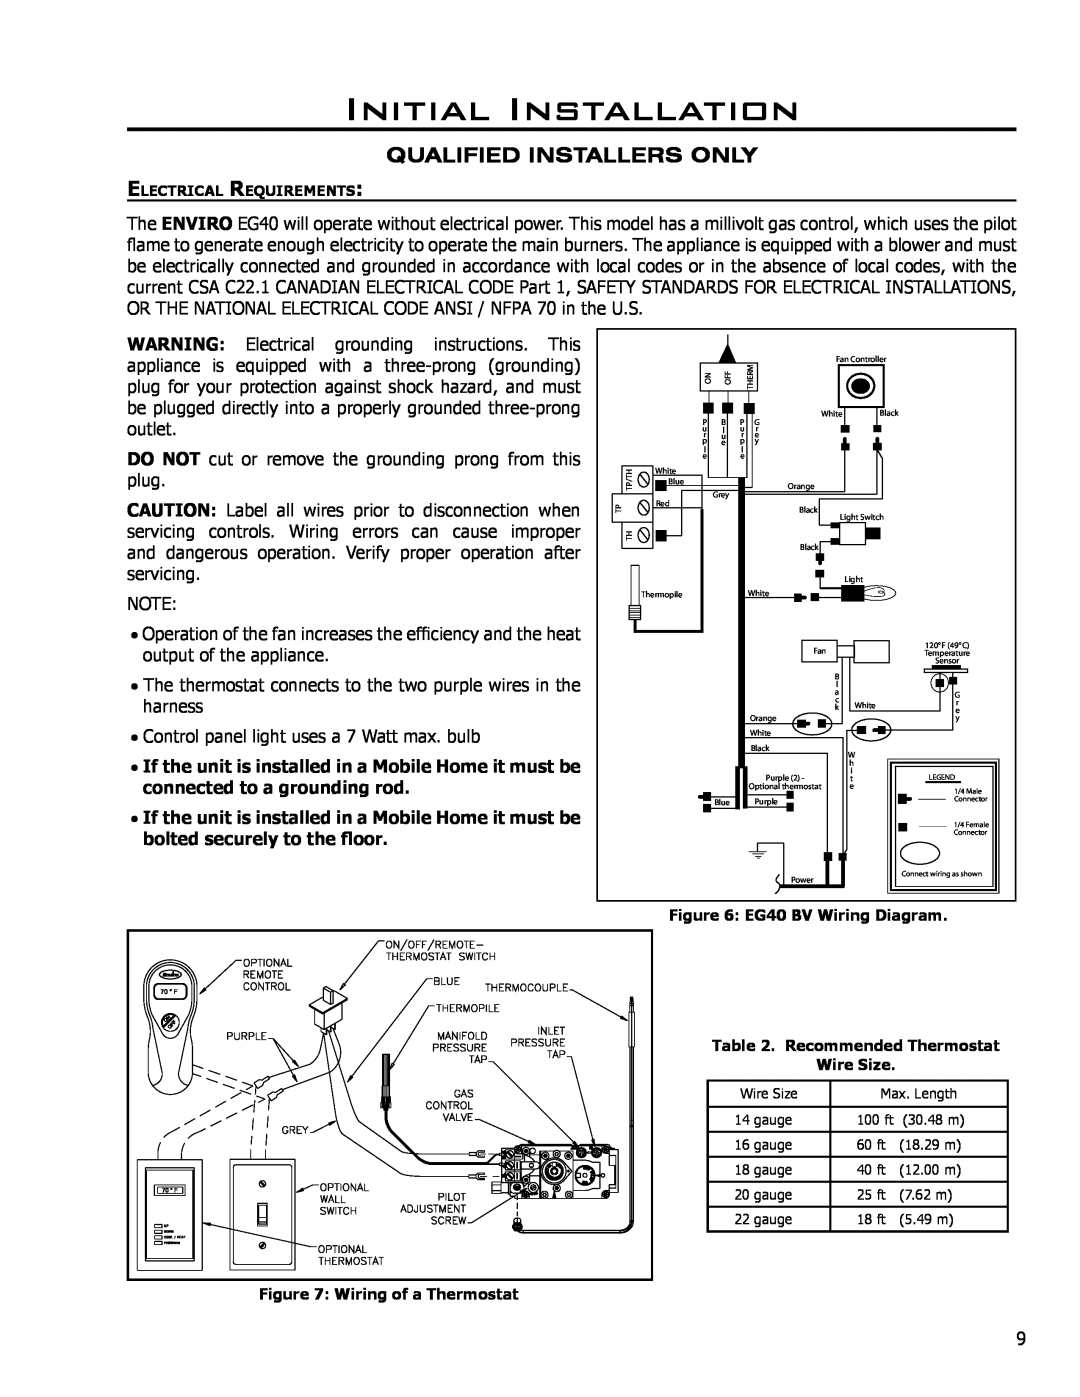 Enviro EG40 BV owner manual Initial Installation, Qualified Installers Only, Control panel light uses a 7 Watt max. bulb 